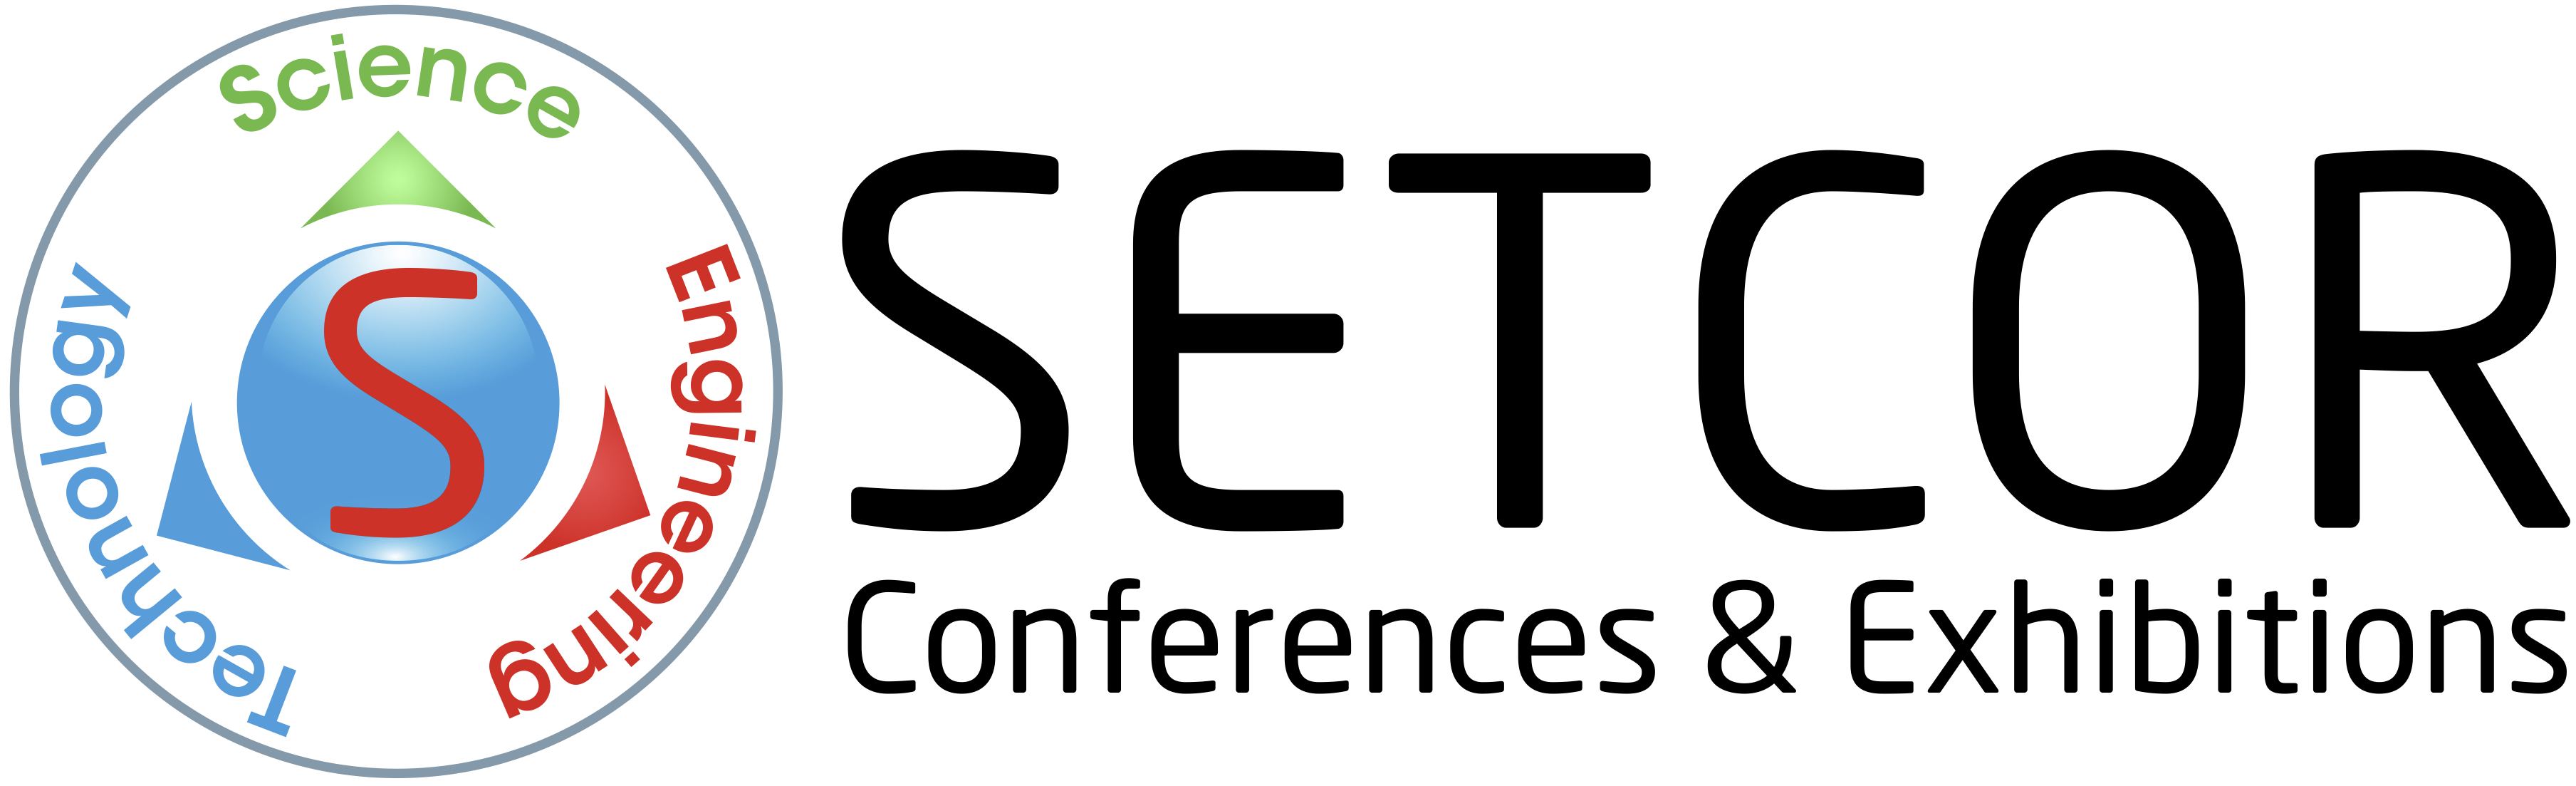 The Science, Engineering, Technology Conferences Organisers ("SETCOR") organises multidisciplinary conferences for academics and professionals in the fields of science, engineering, medicine, energy and environment.